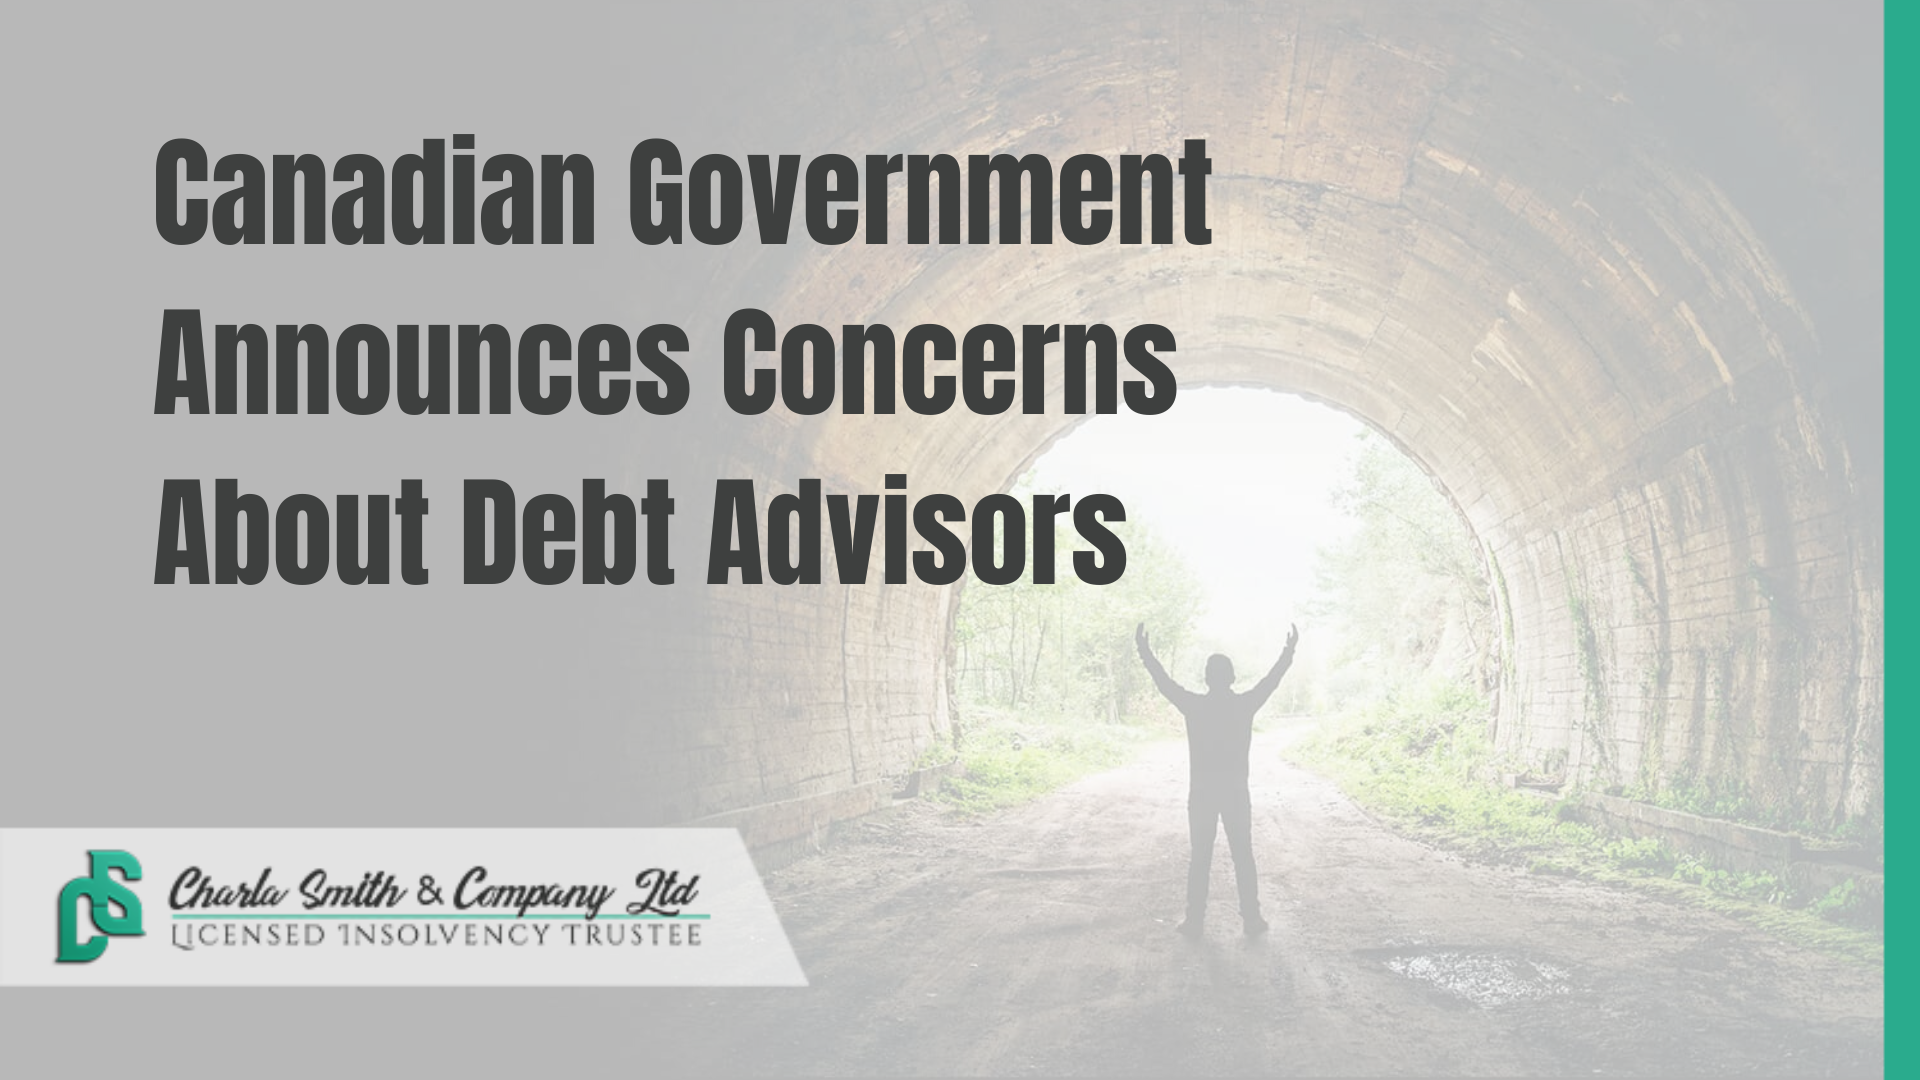 Canadian Government Announces Concerns About Debt Advisors